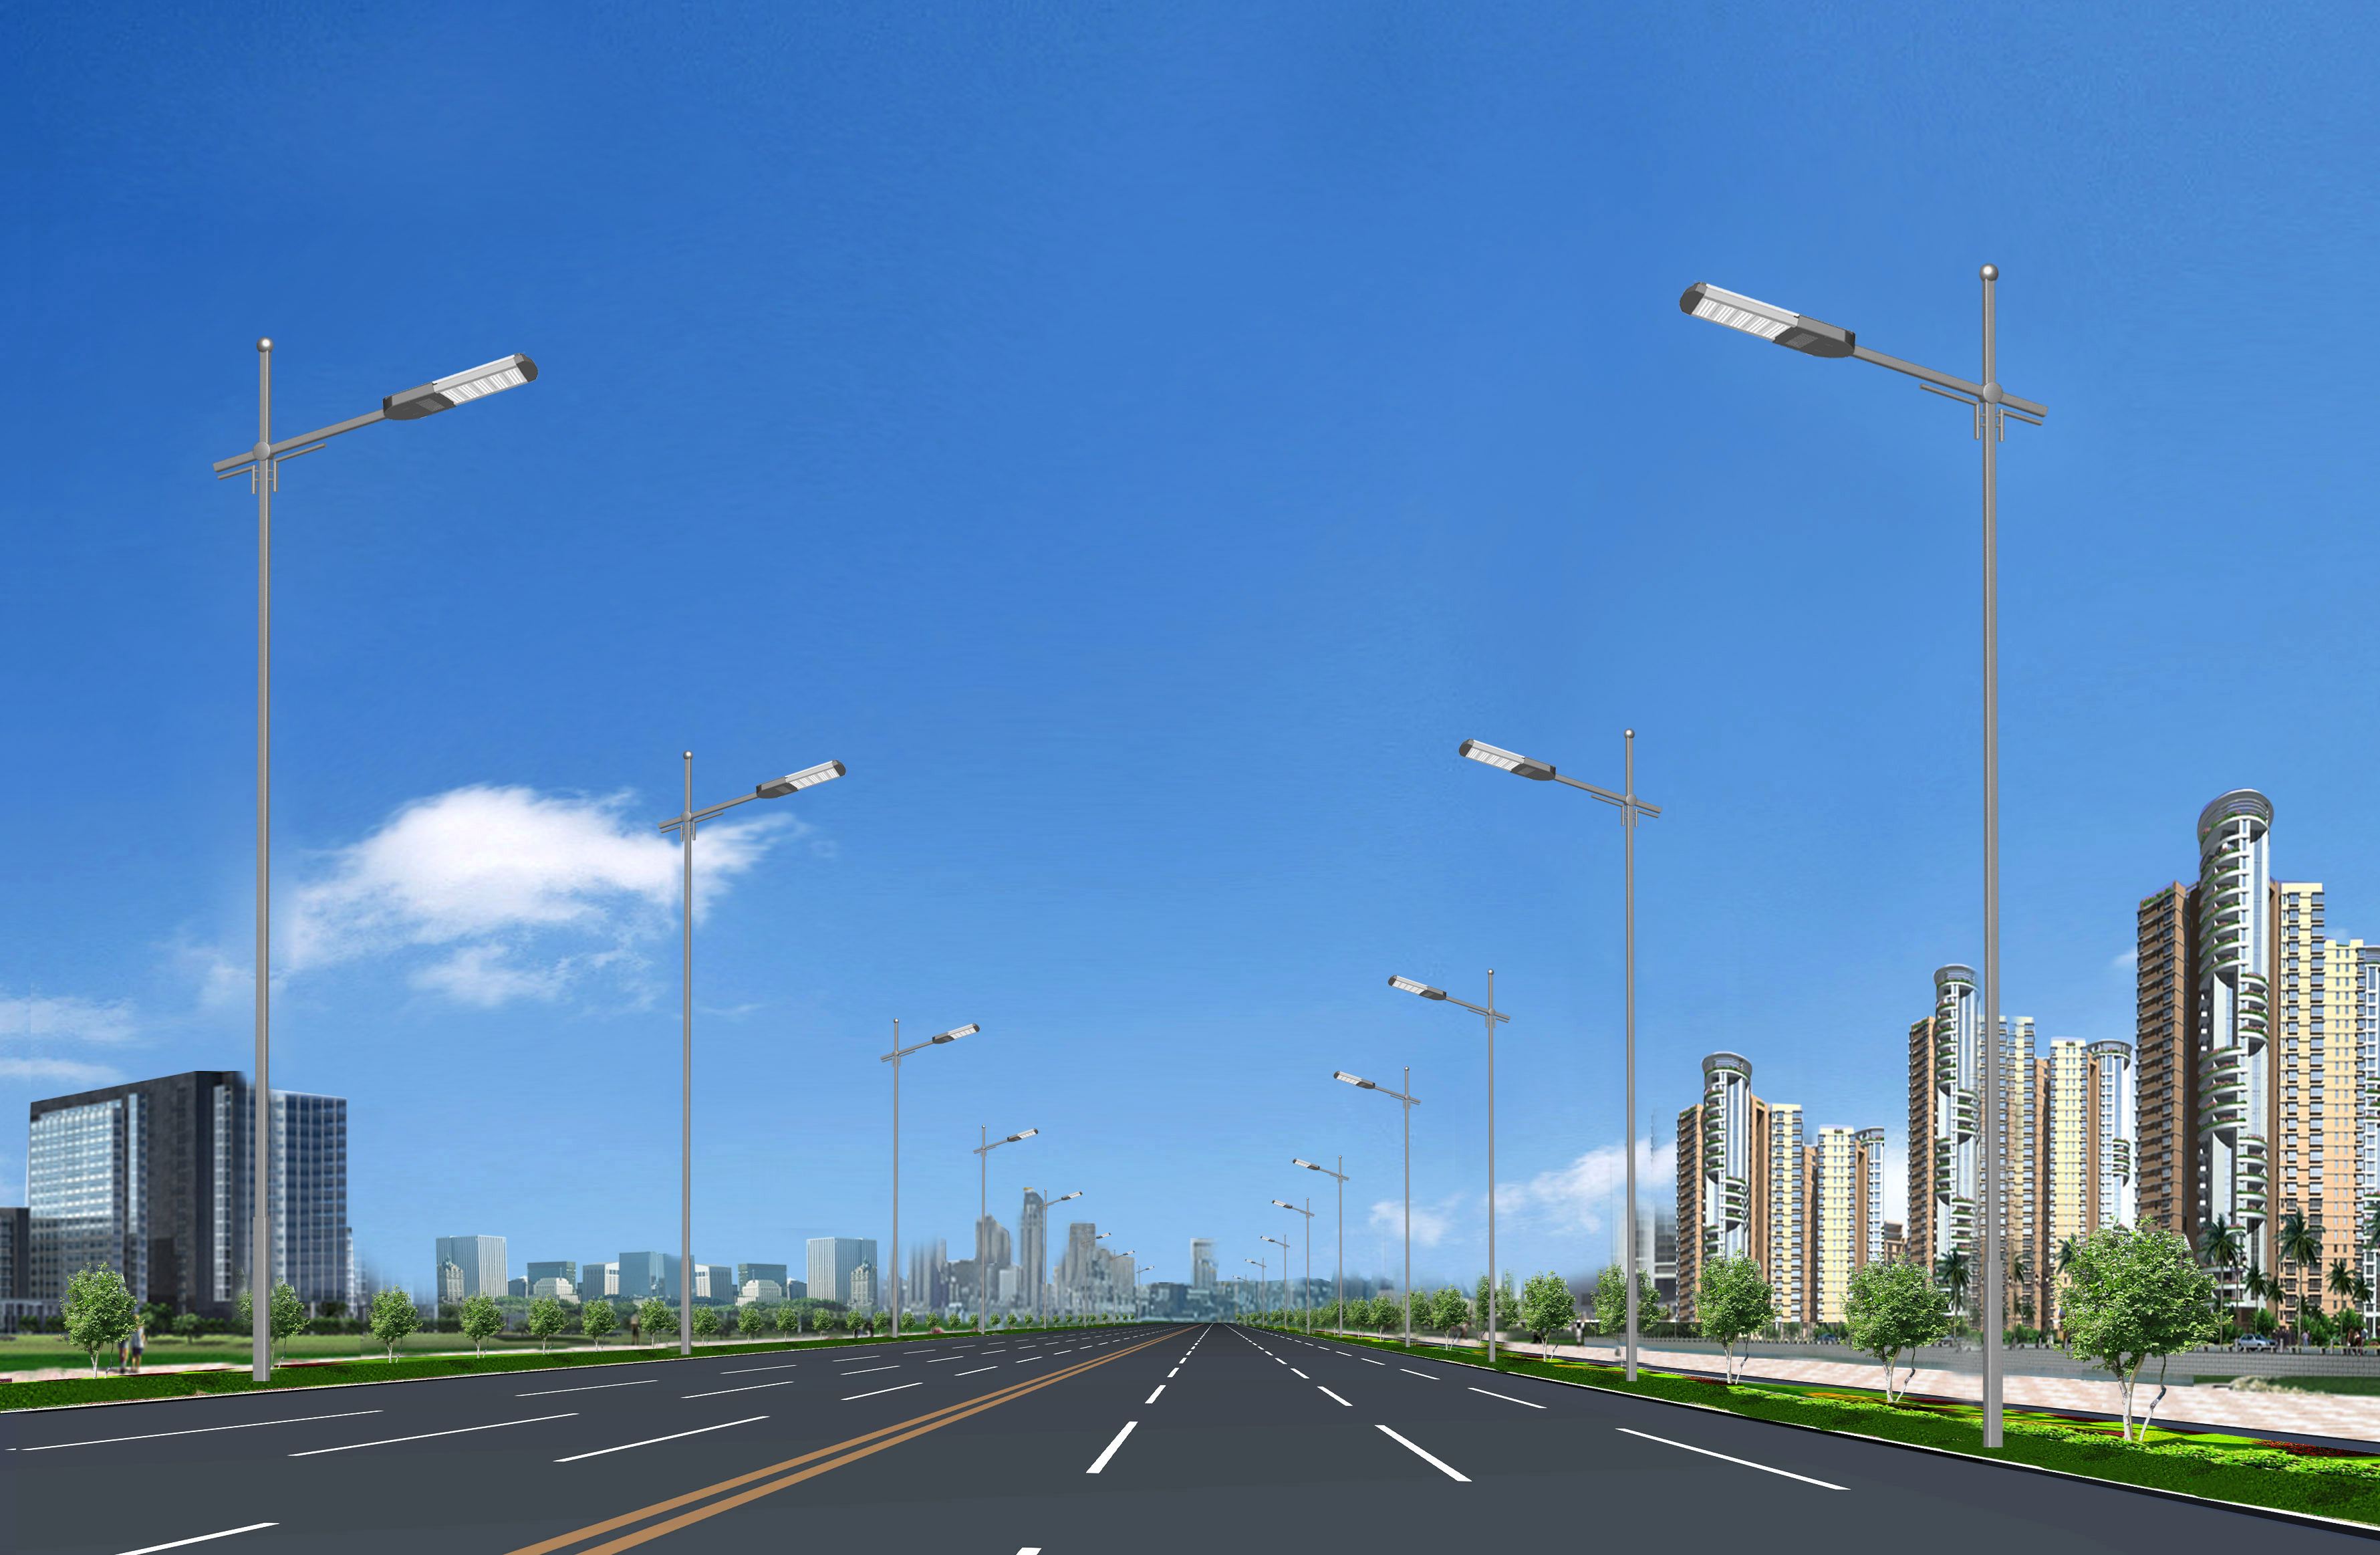 How to quickly appraise the quality of LED street lights?